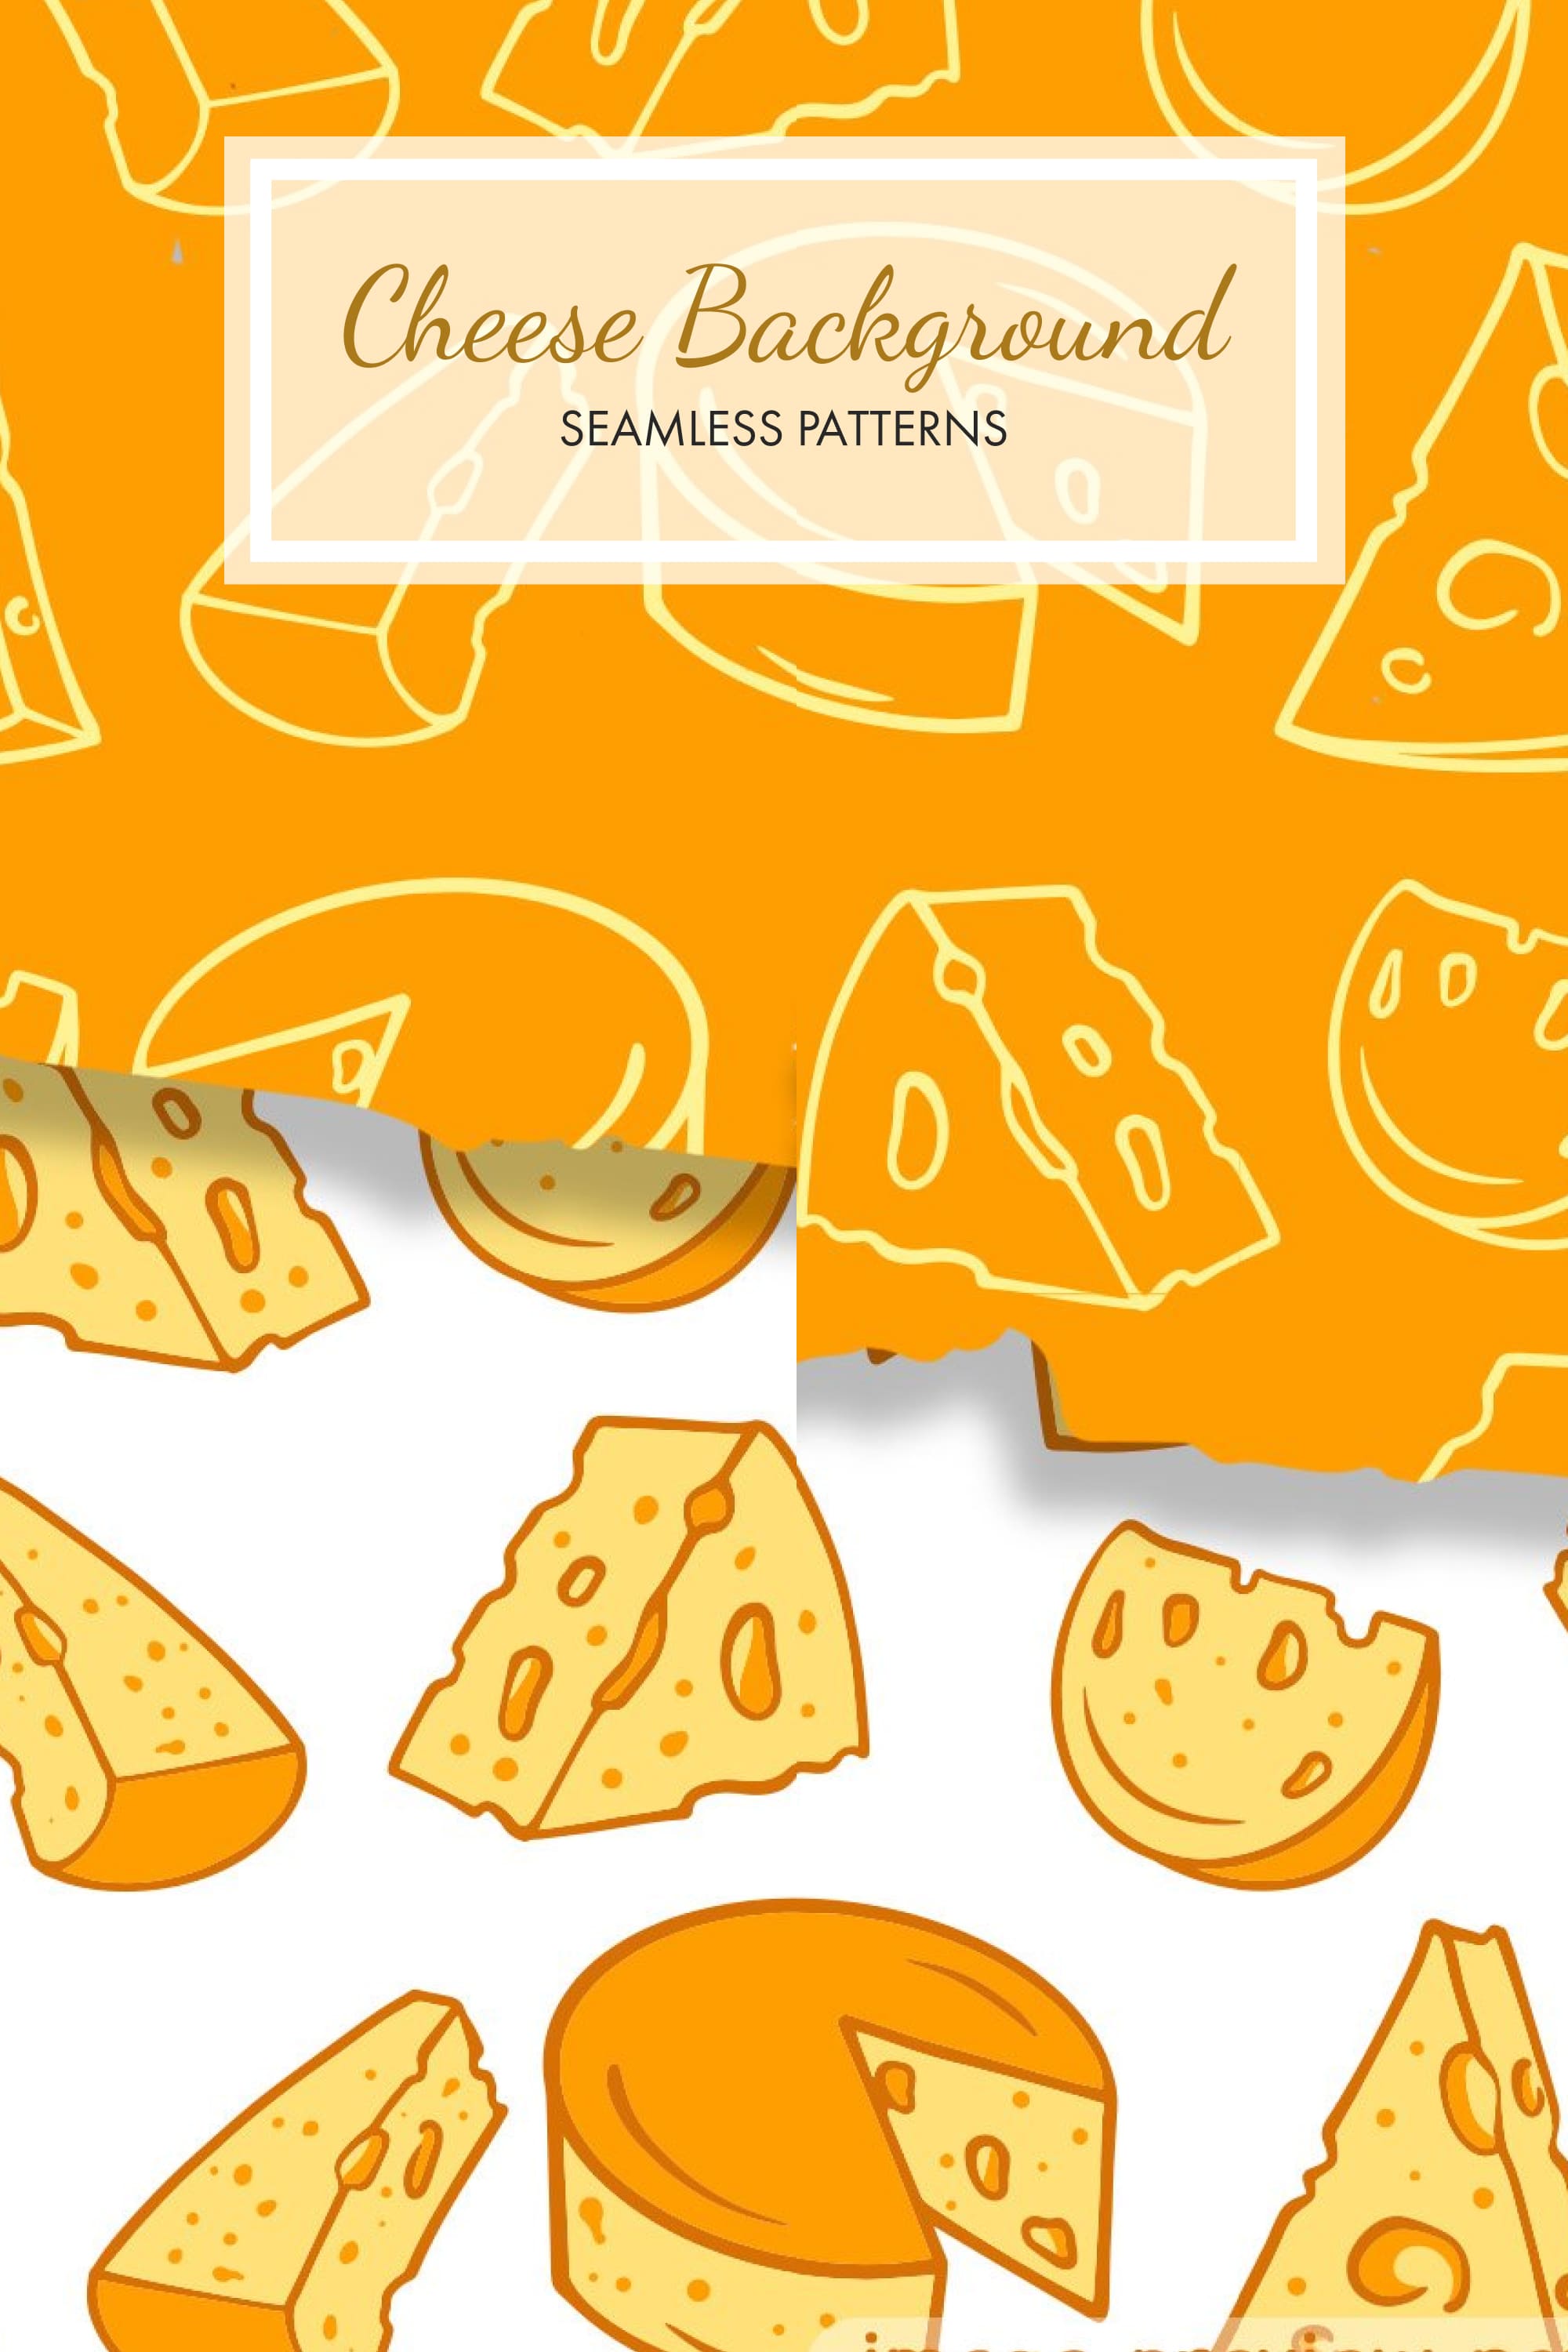 Gorgeous seamless pattern with images of french cheese.